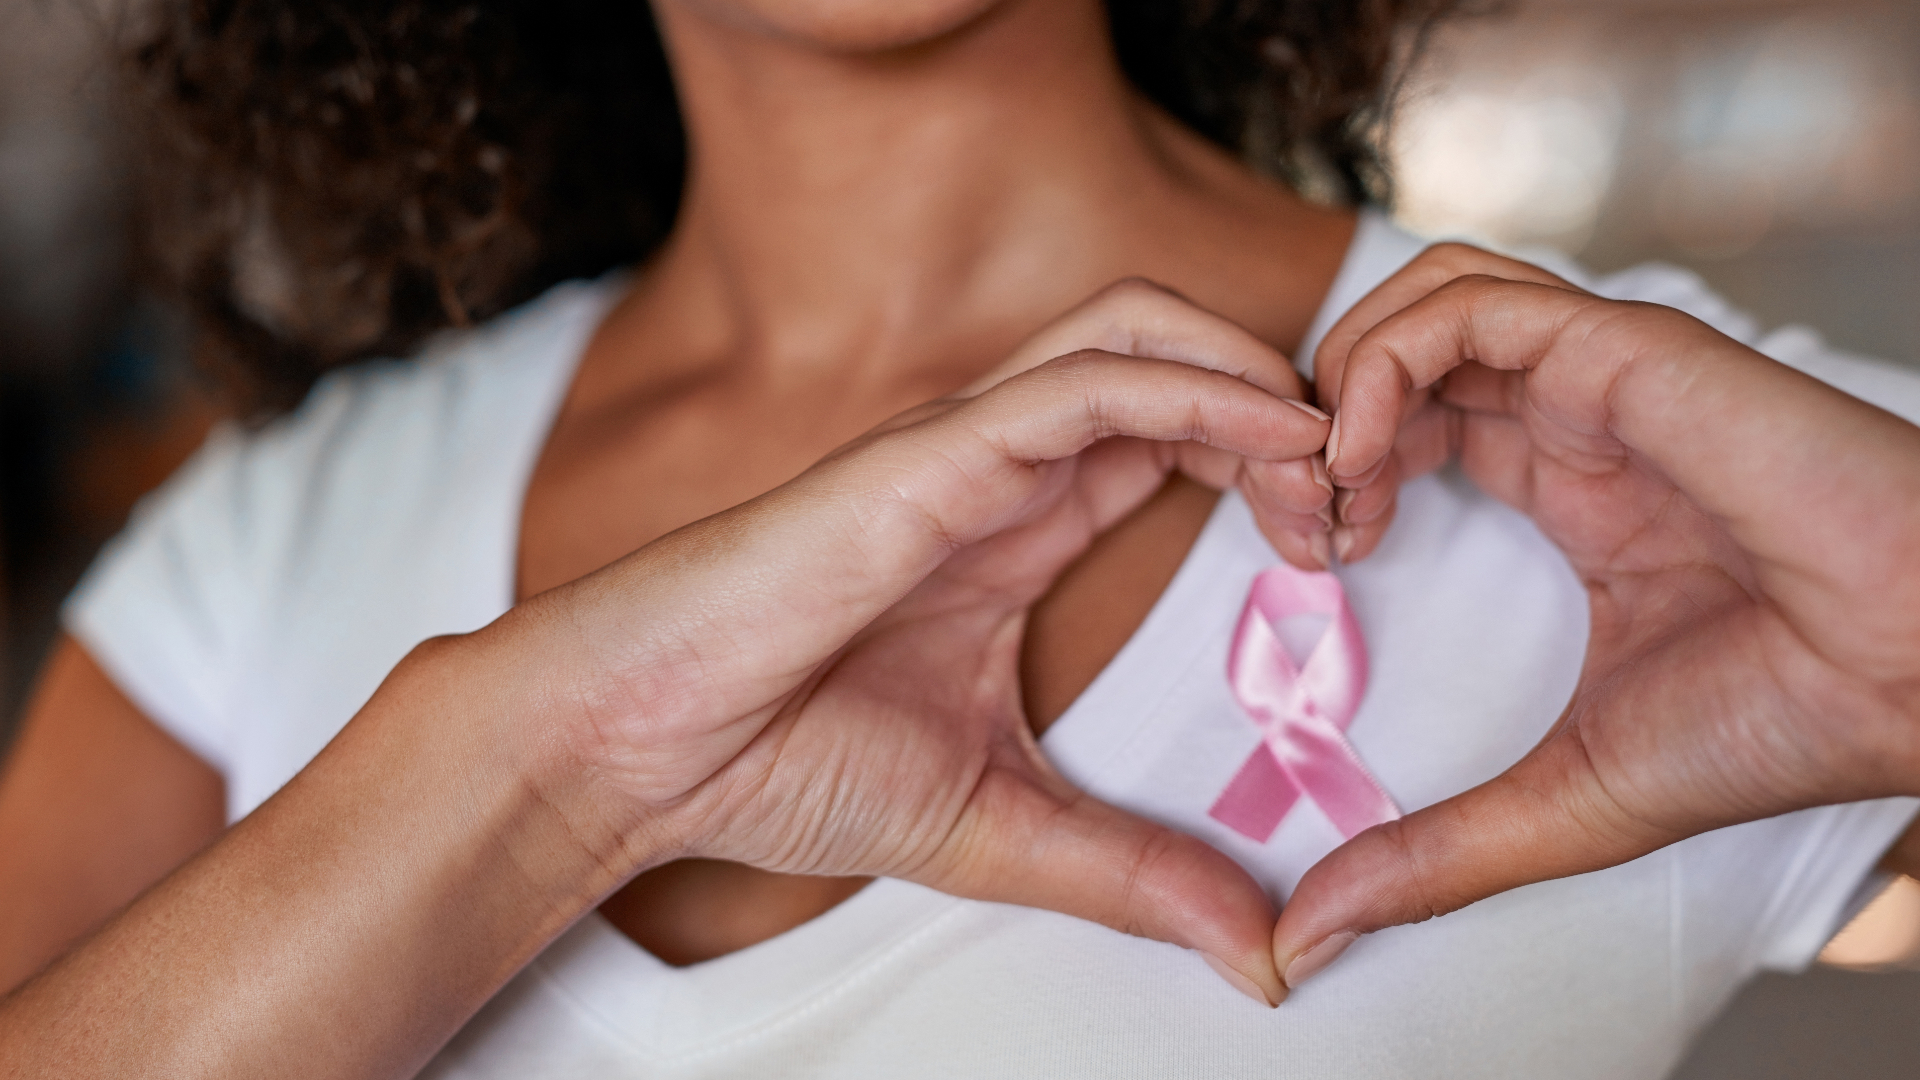 Identifying first signs of heart vessel changes in young breast cancer patients receiving estrogen-deprivation therapy may lead to strategies to prevent heart disease risk 